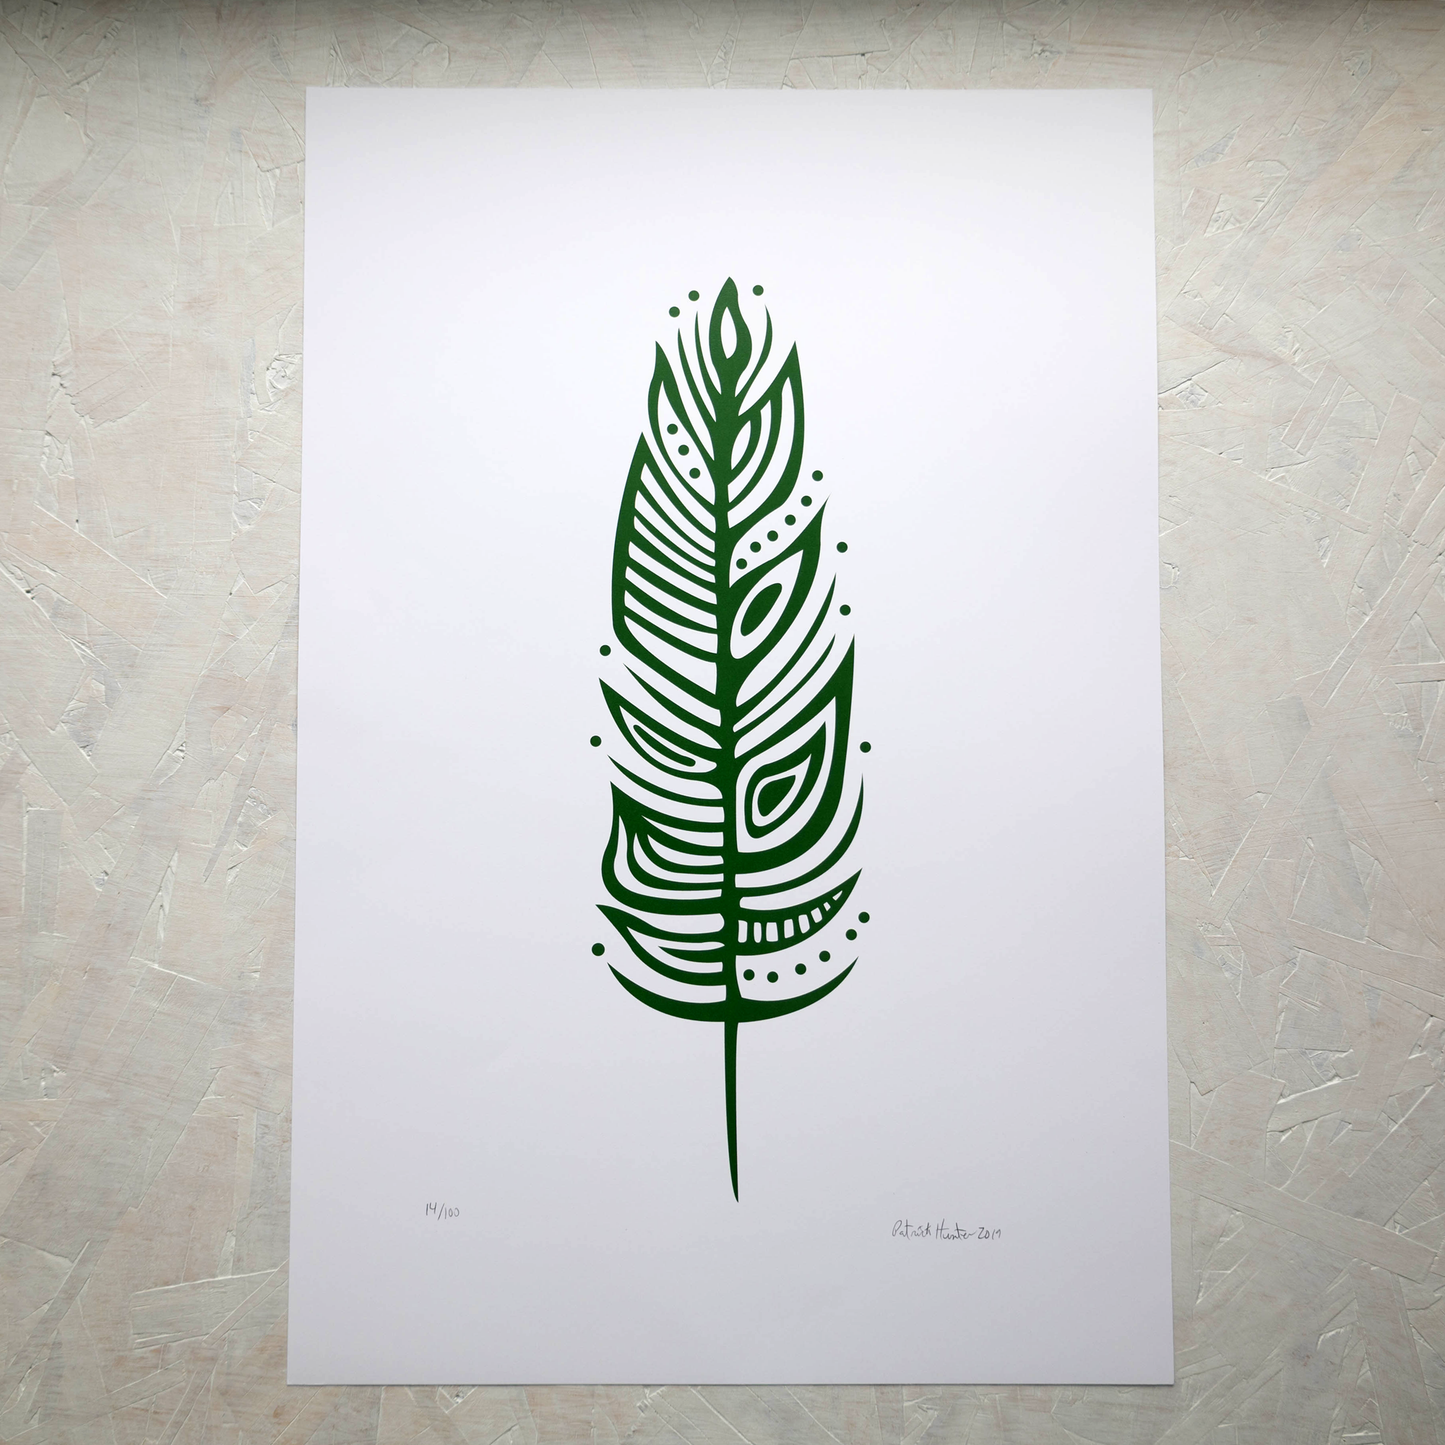 Print of Patrick Hunter's painting of an eagle feather in green on white, woodland art style.